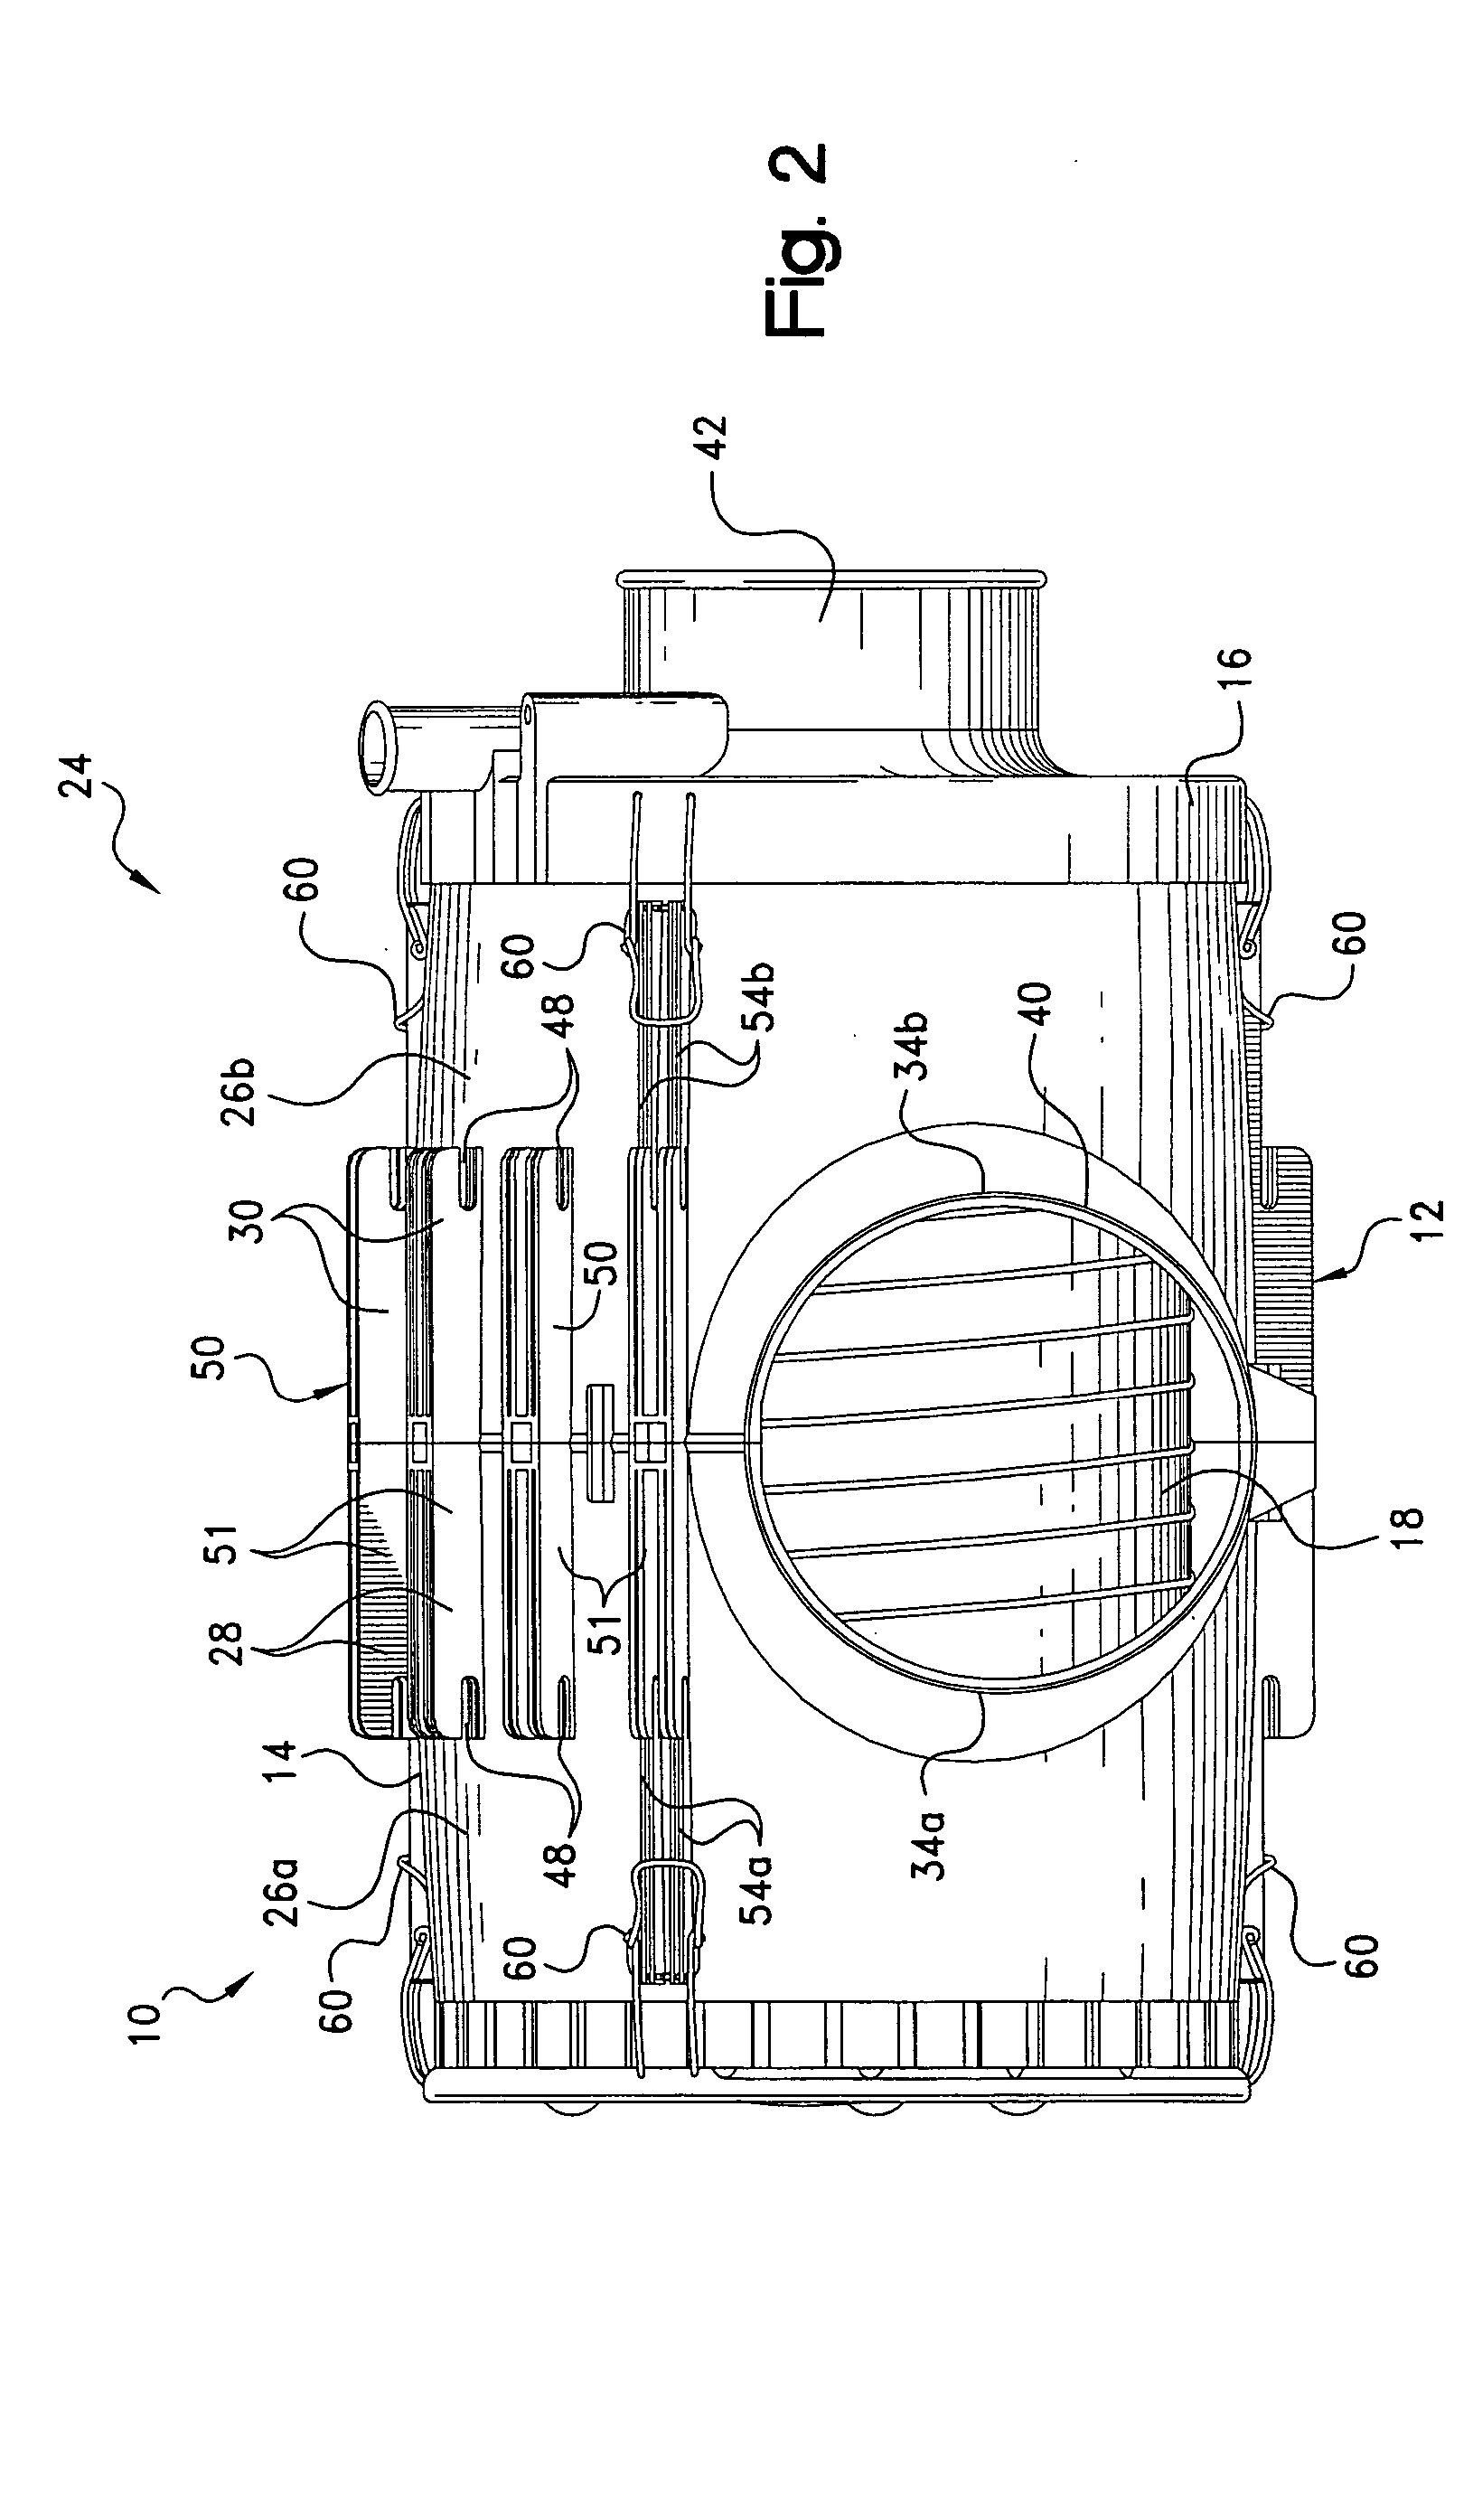 Air filter assembly system and method